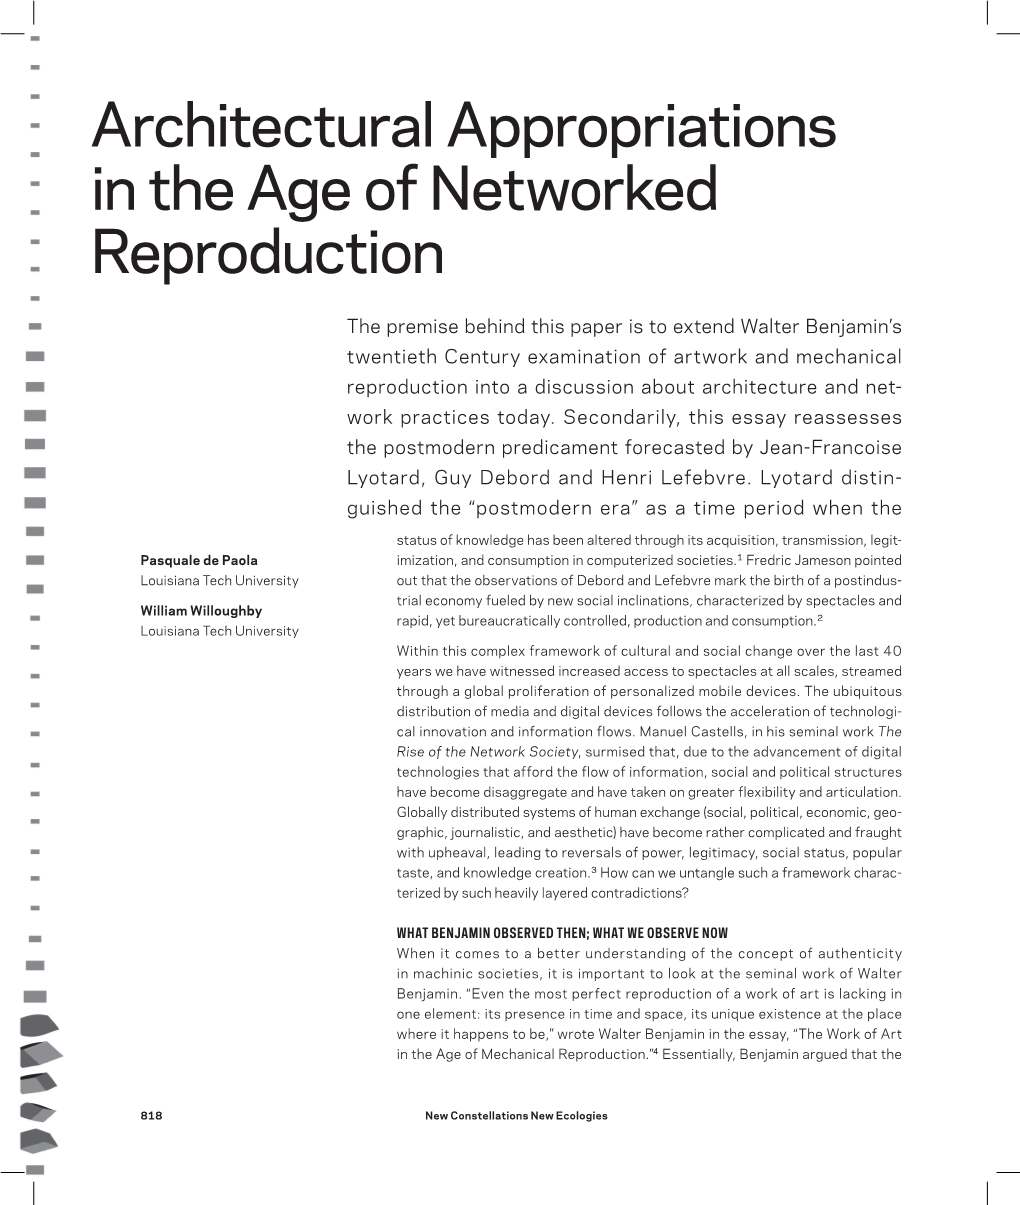 Architectural Appropriations in the Age of Networked Reproduction